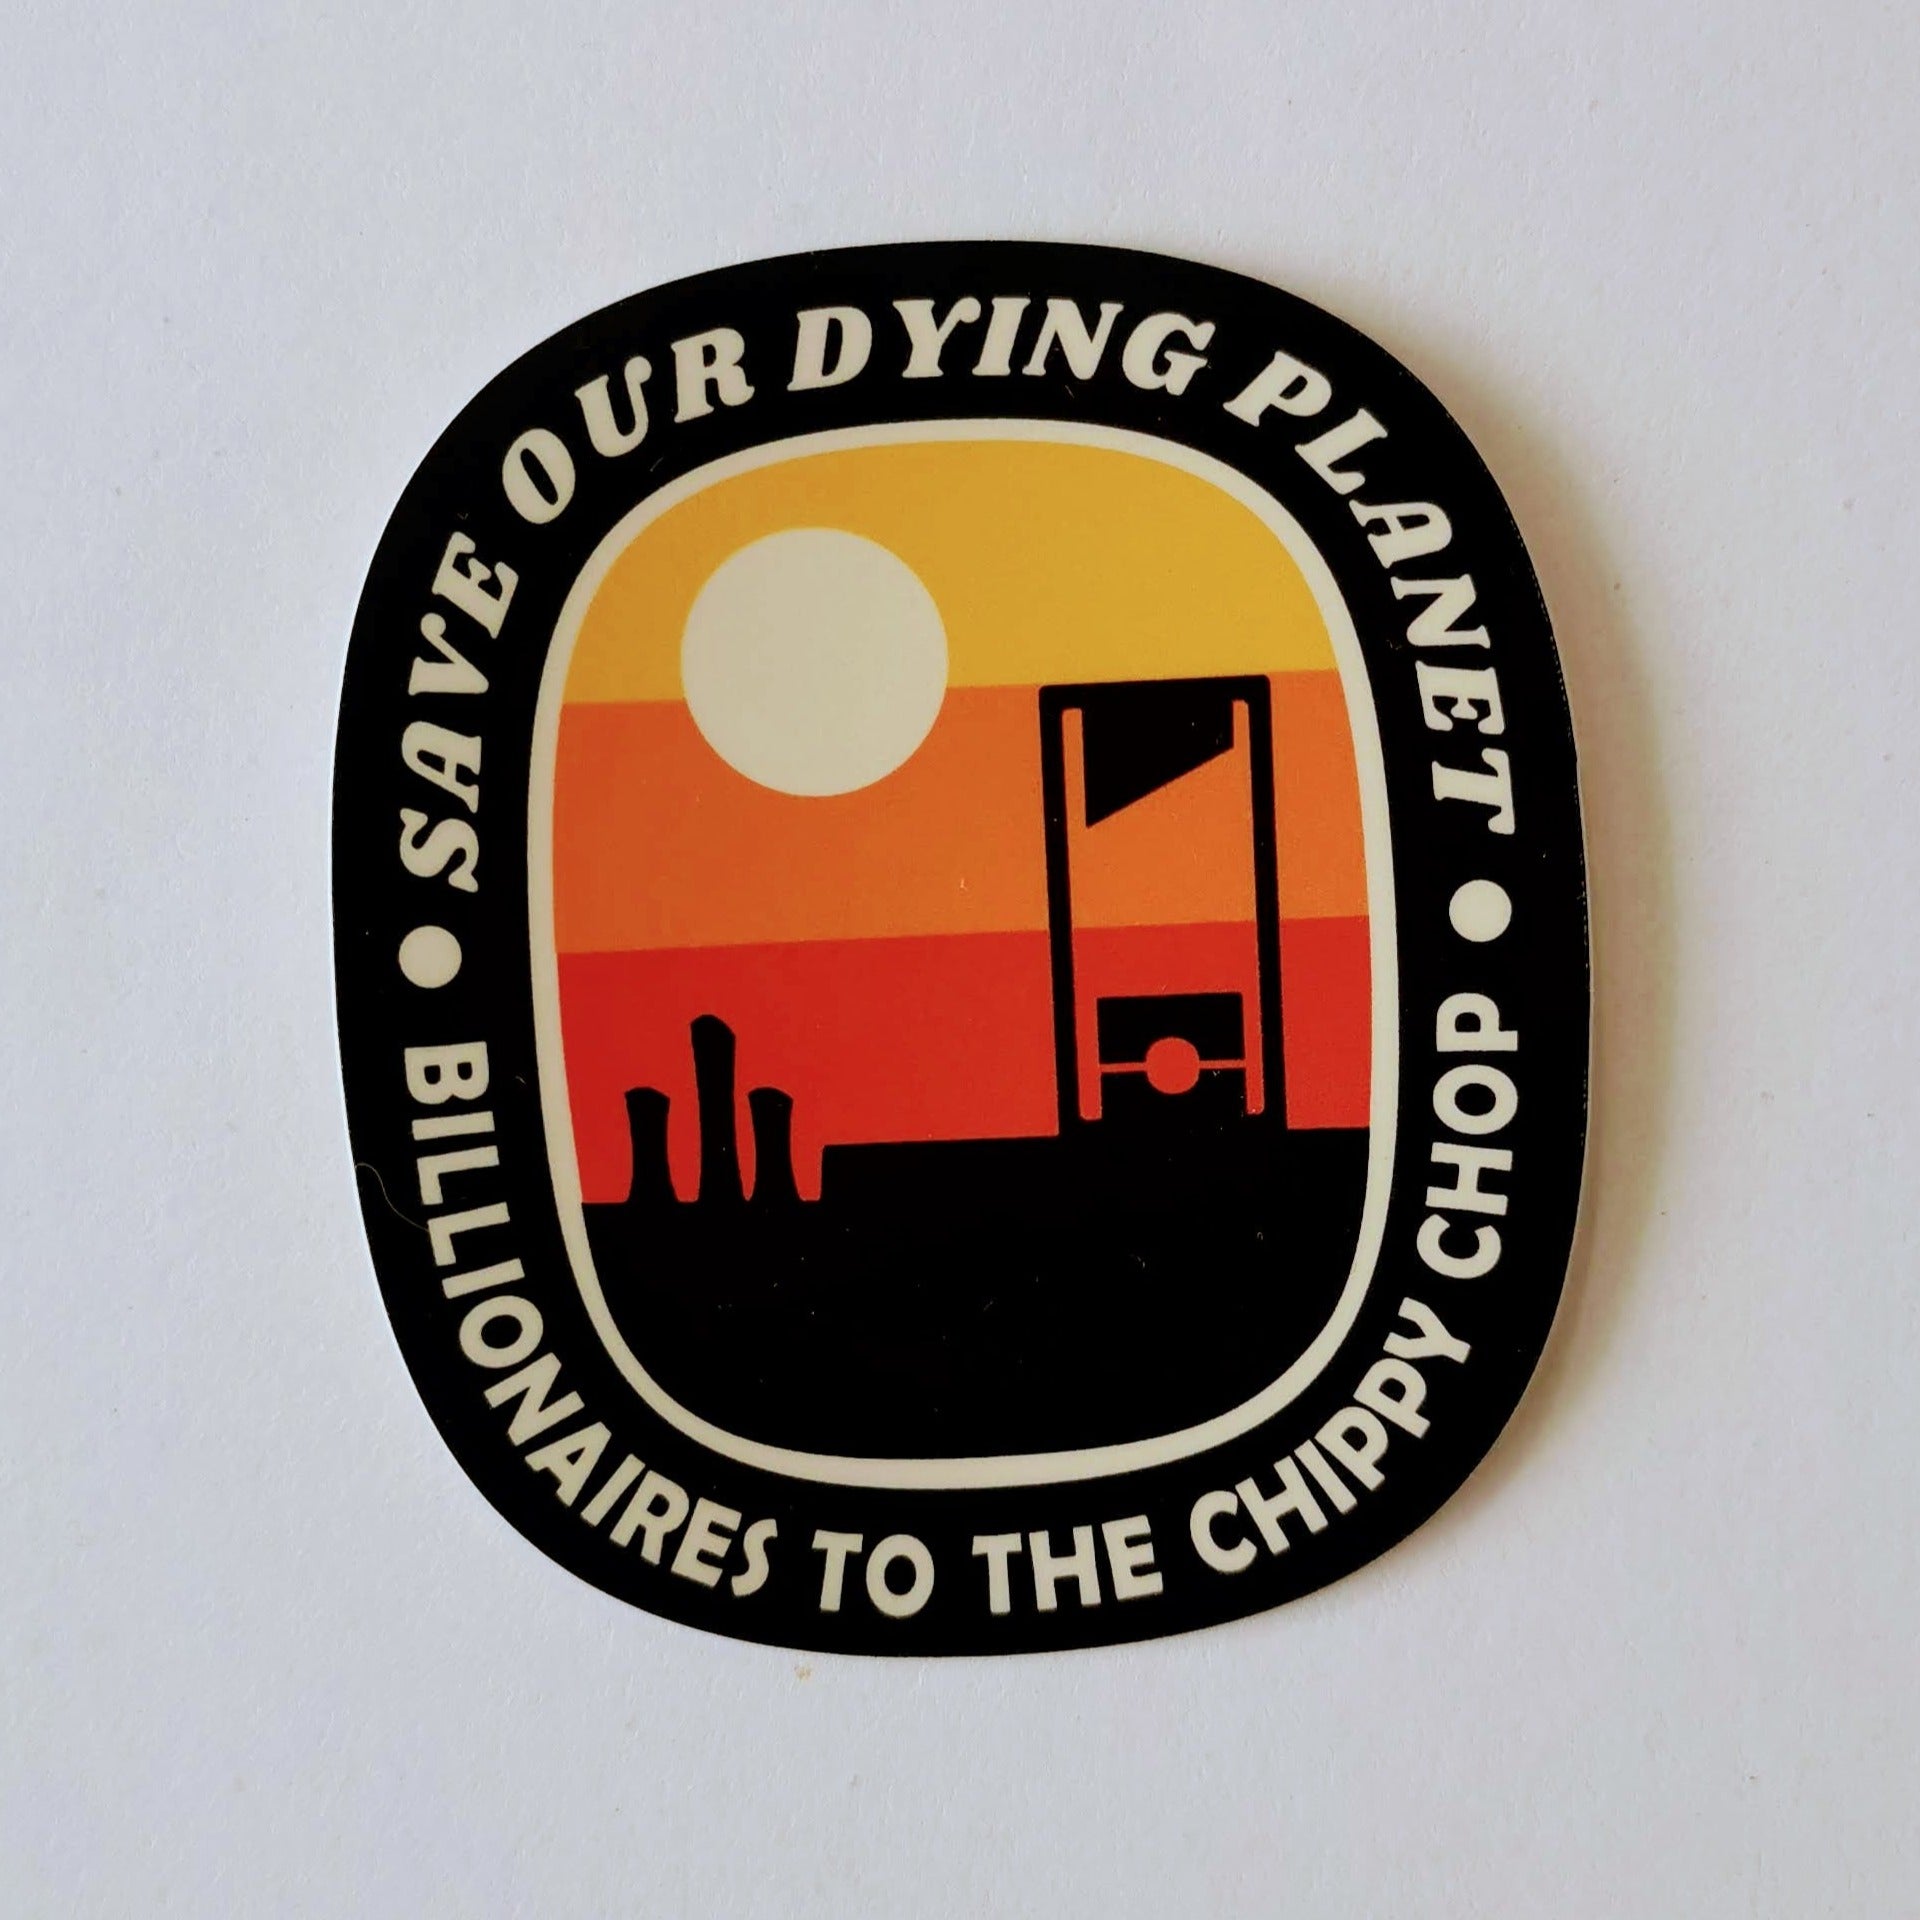 A round-ish rectangle with the words "save our dying planet. billionaires to the chippy chop" around the thick black border and a colour-block sunrise with a certain 18th century french giant slicing machine in the foreground